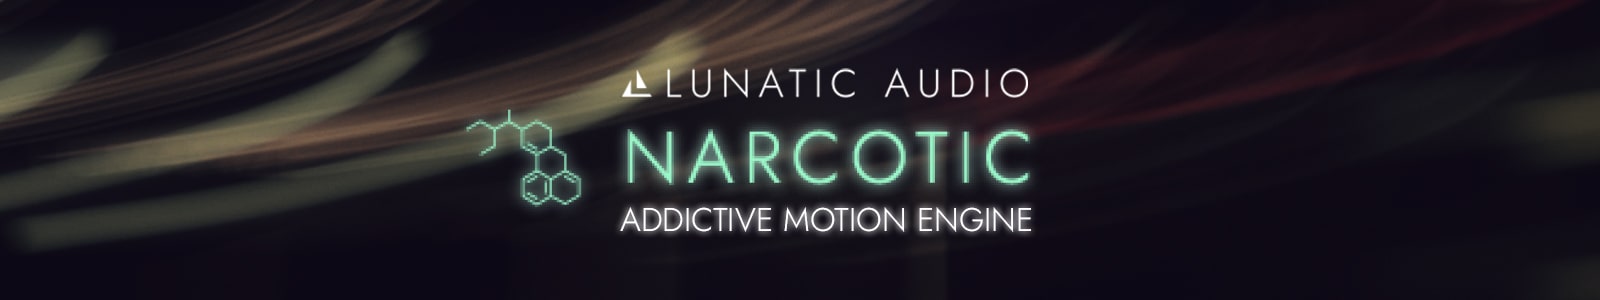 Narcotic by Lunatic Audio